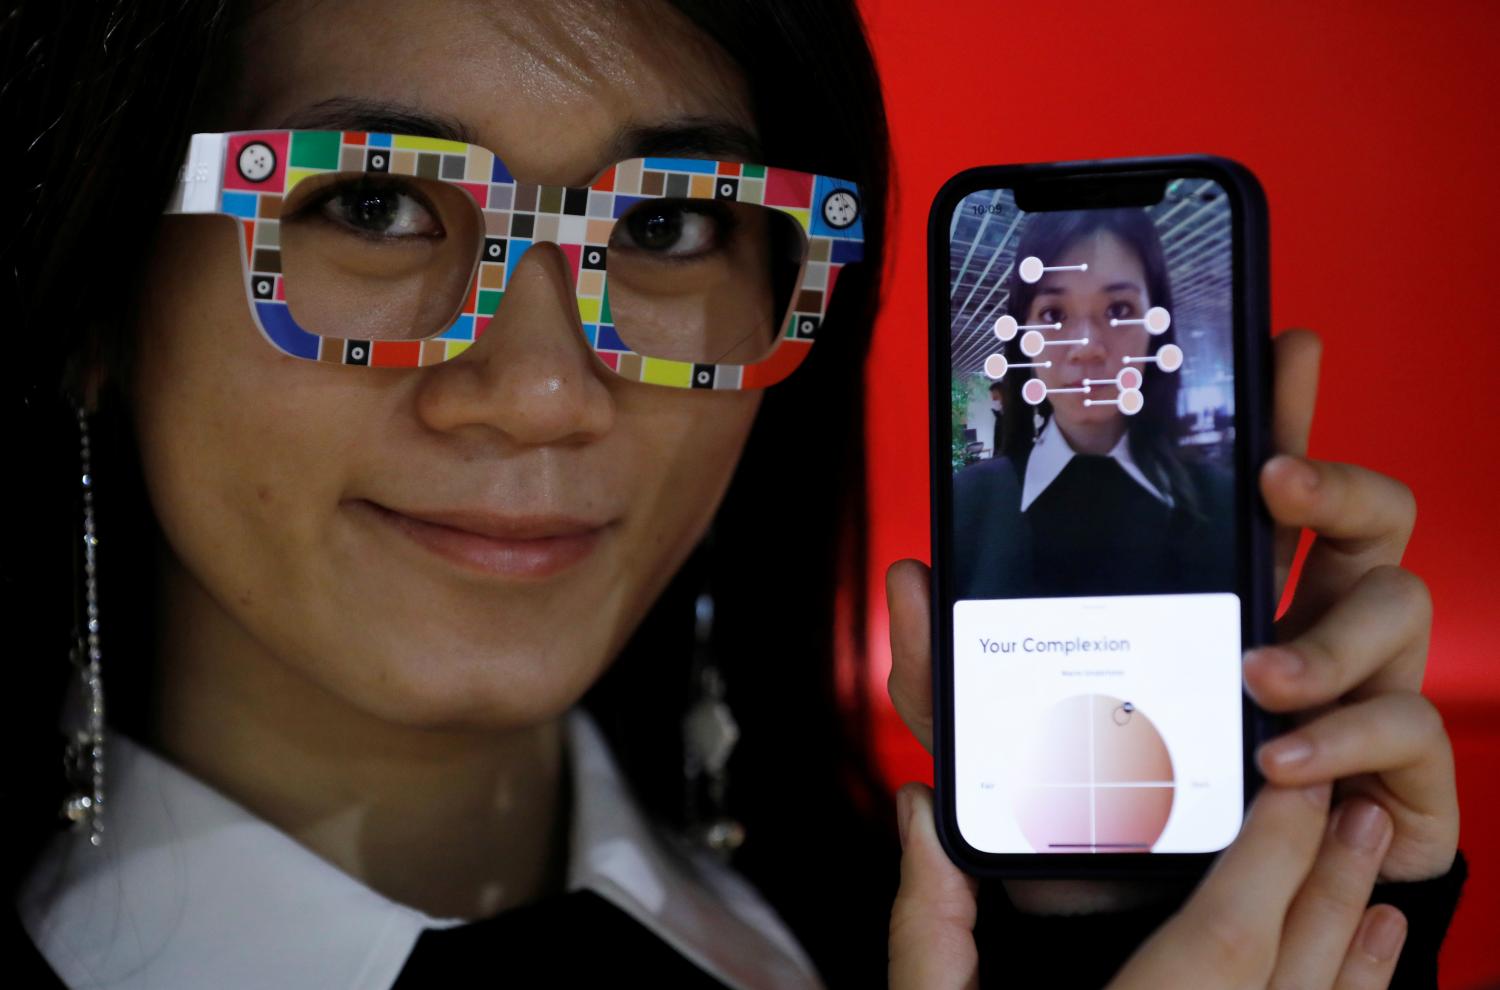 An employee of online fashion retailer Zozo Inc, poses with Zozoglass and its smartphone application, used to measure skin tone for ordering cosmetics online, during a demonstration at the company's office in Tokyo, Japan, January 28, 2021. Picture taken January 28, 2021. REUTERS/Kim Kyung-Hoon